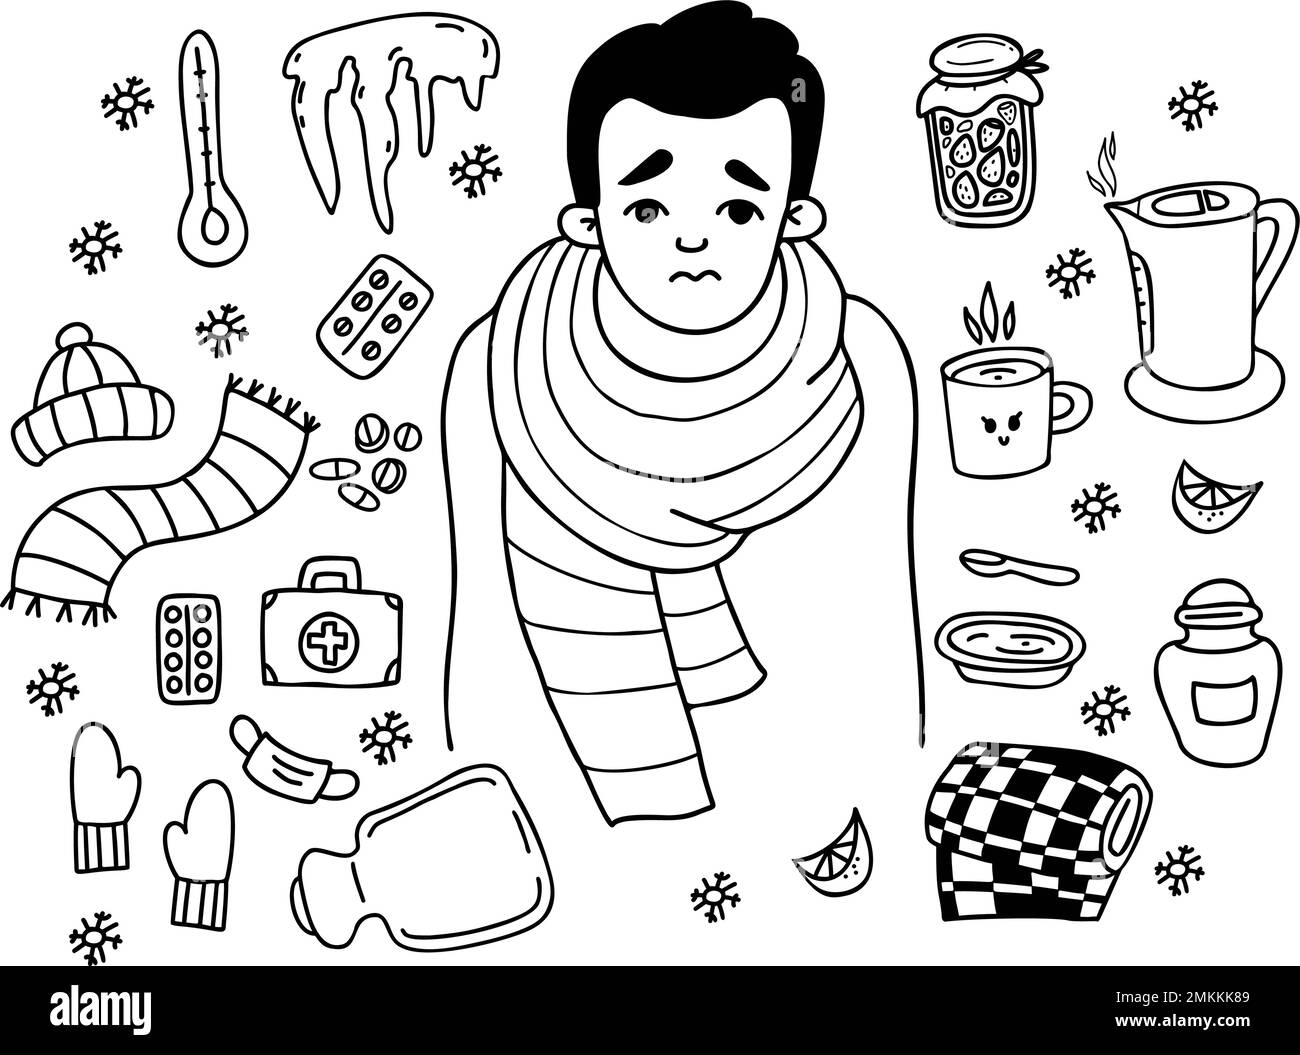 Sick sad man wrapped in scarf. Collection of medical supplies pills, first aid kit, hat, gloves, jam, kettle, heating pad and thermometer. Isolated ve Stock Vector